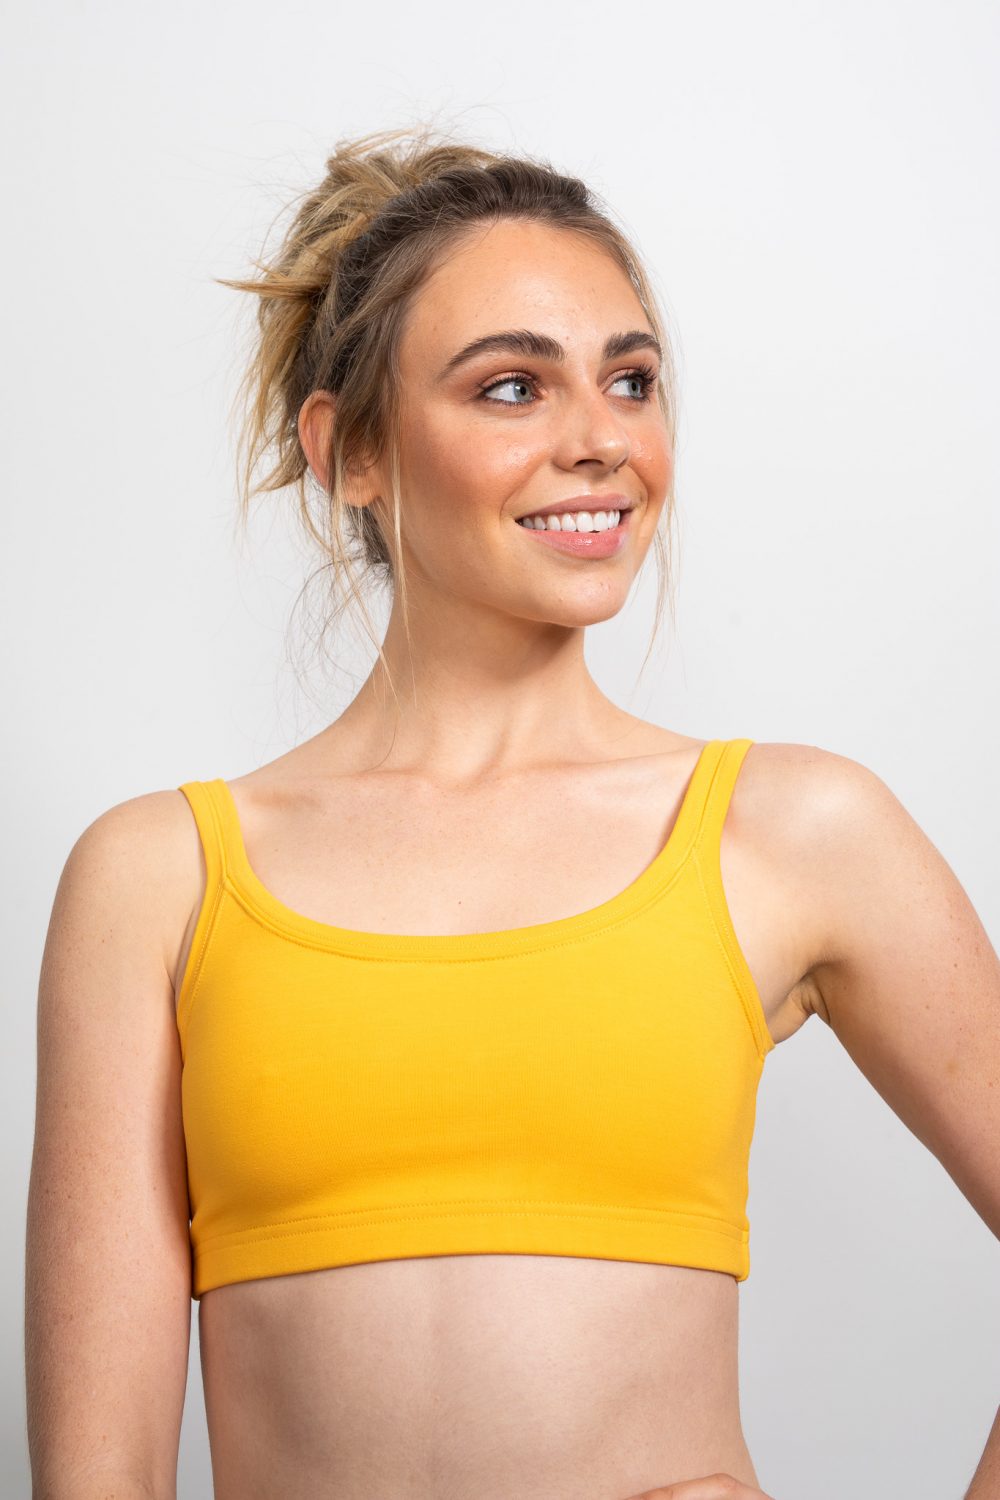 Our Happy Crop Marigold is a new favourite in The Happy People's To Be Collection. It features our iconic To Be U logo embroidered on the back centre.